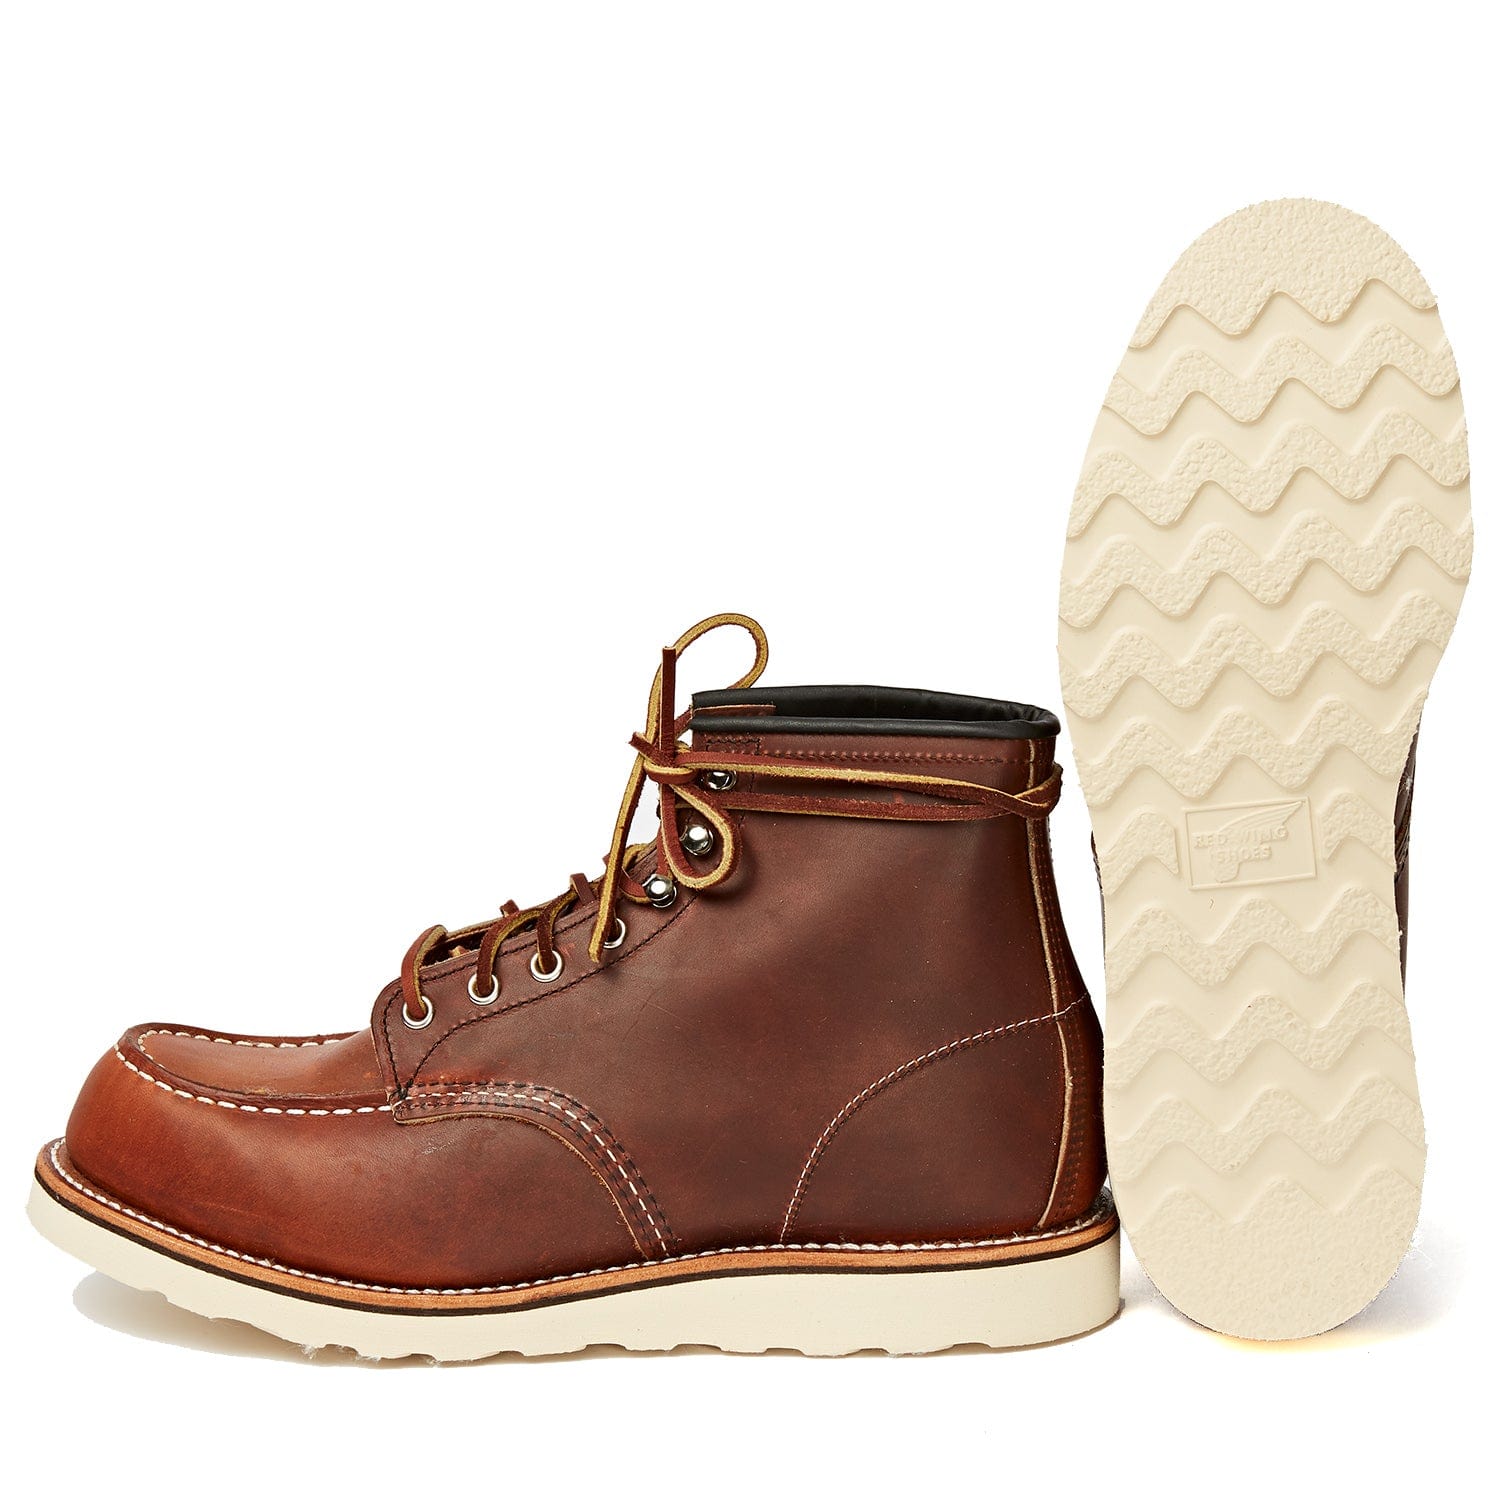 suffix Reklame skillevæg 87519 Classic Moc Toe Oro Harness – Red Wing